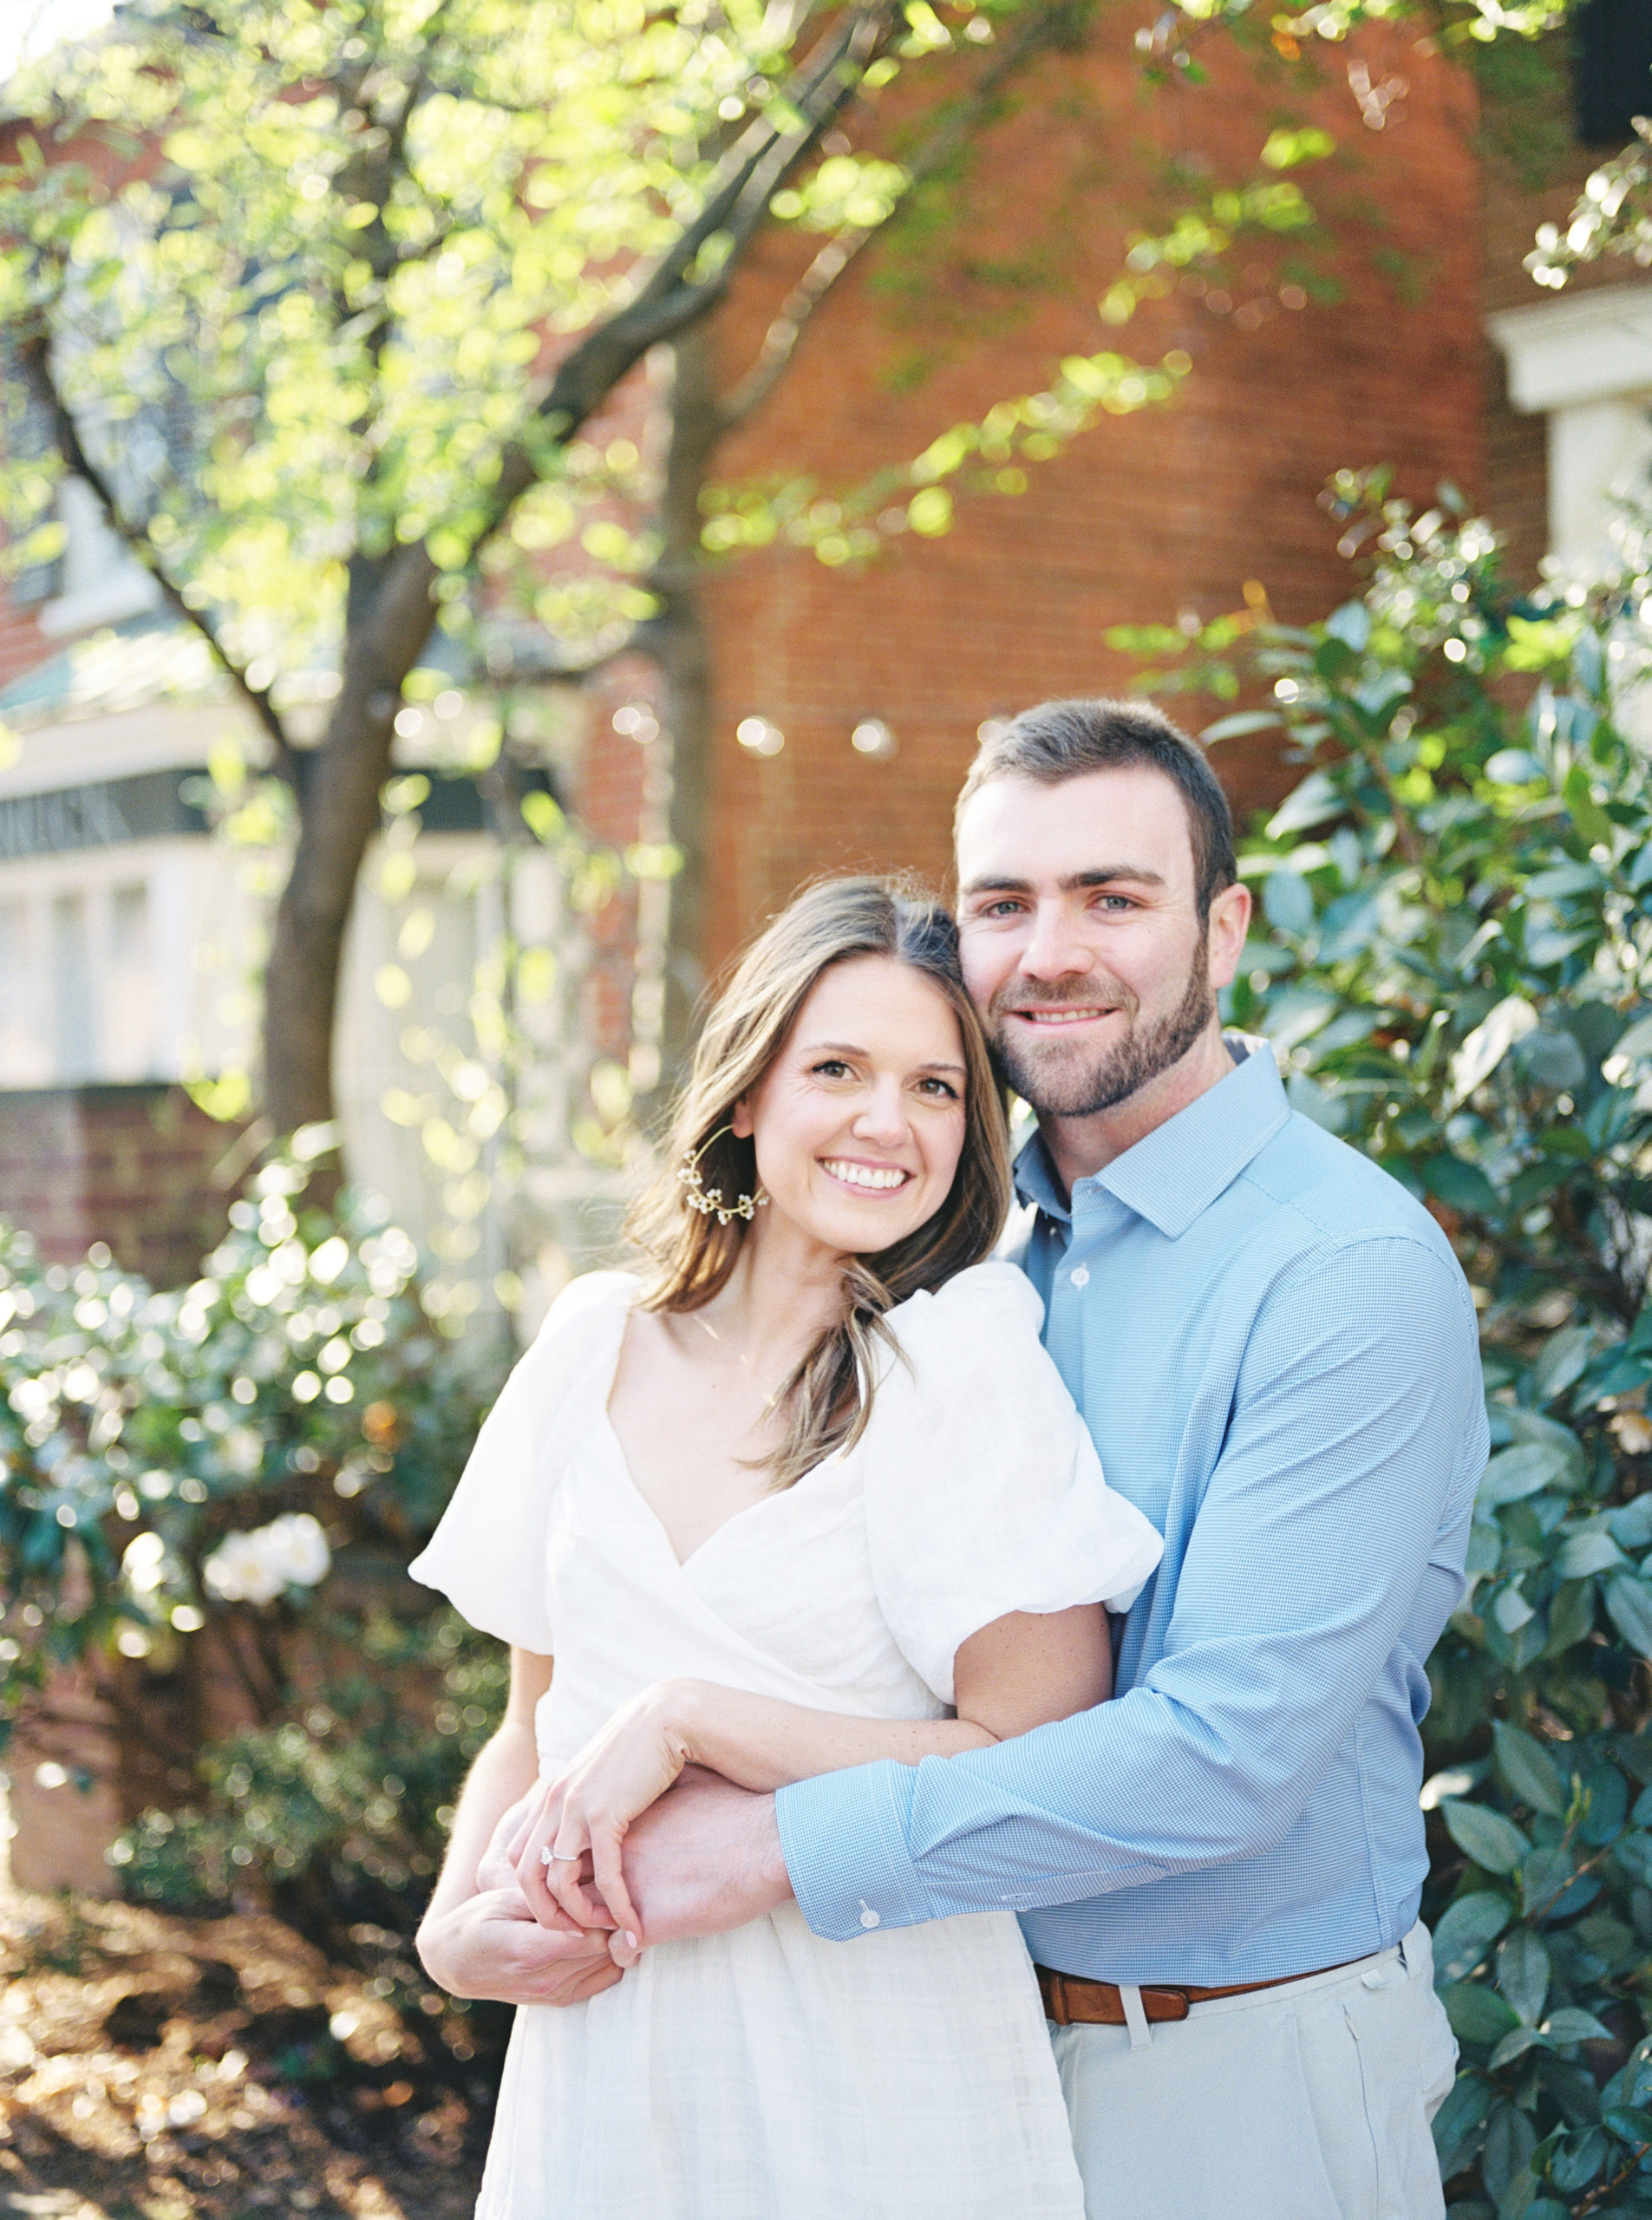 Classic engagement photography in Washington DC Georgetown